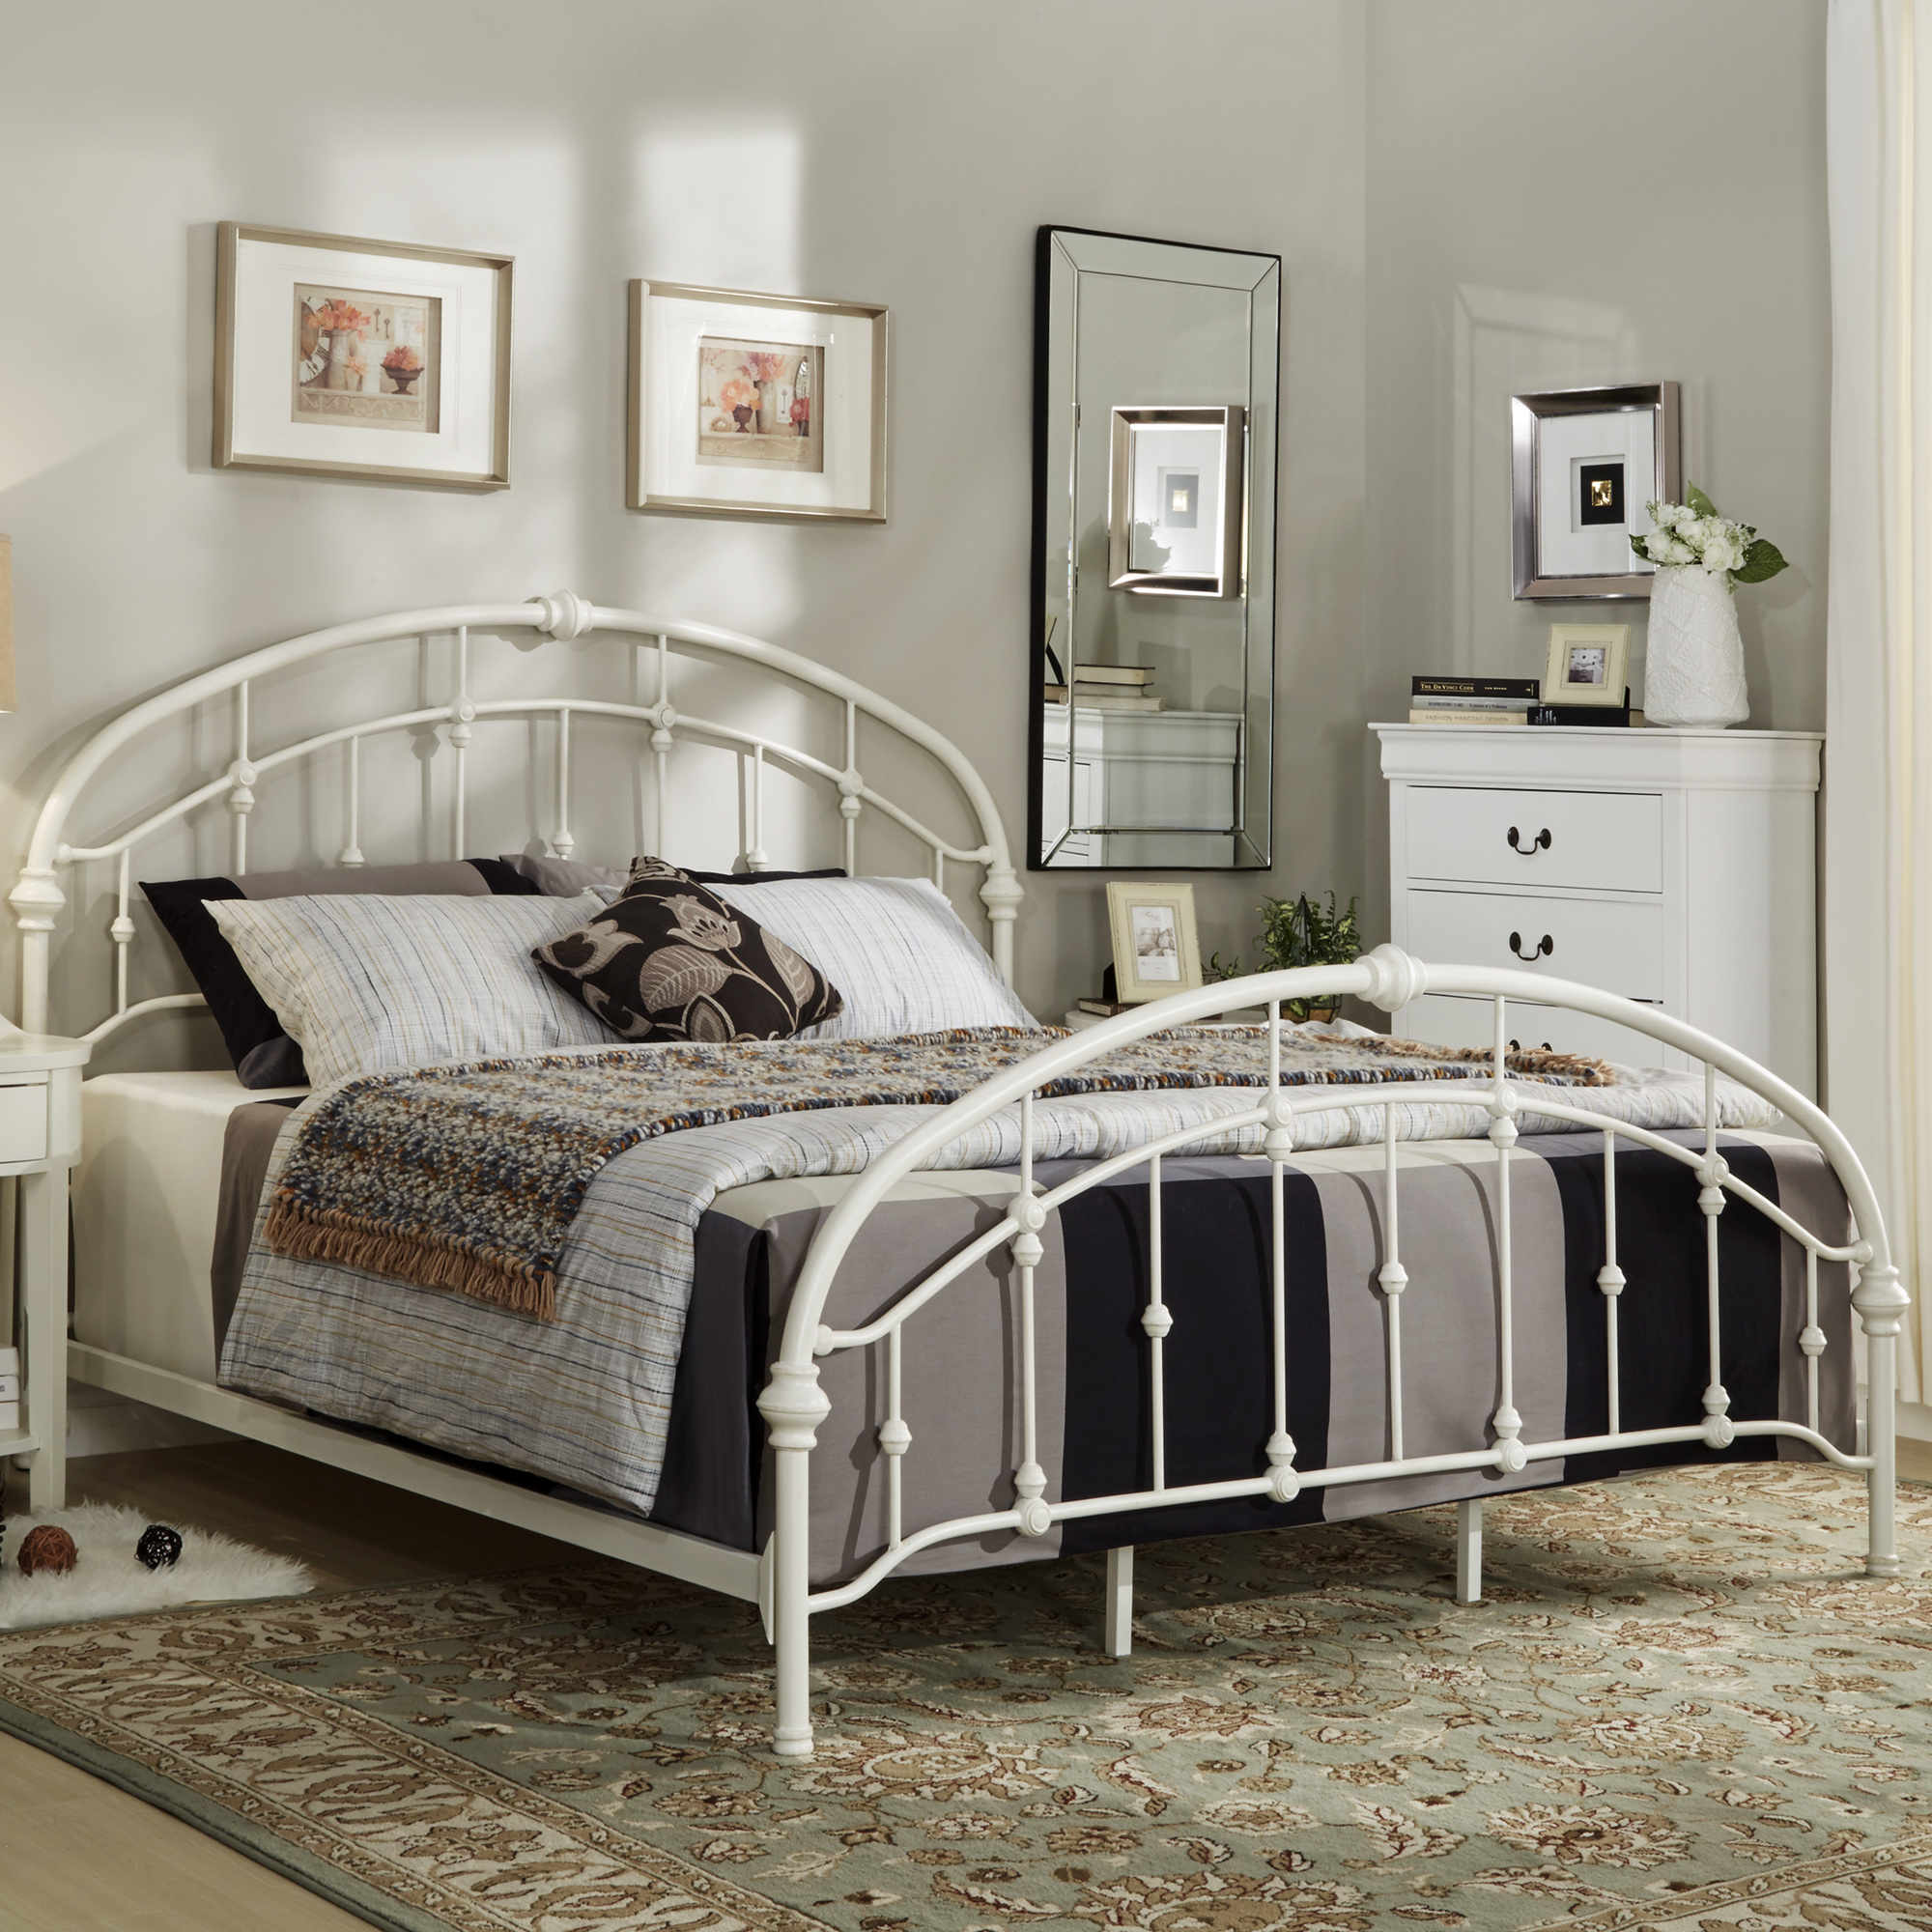 Curved Double Top Arches Victorian Iron Bed